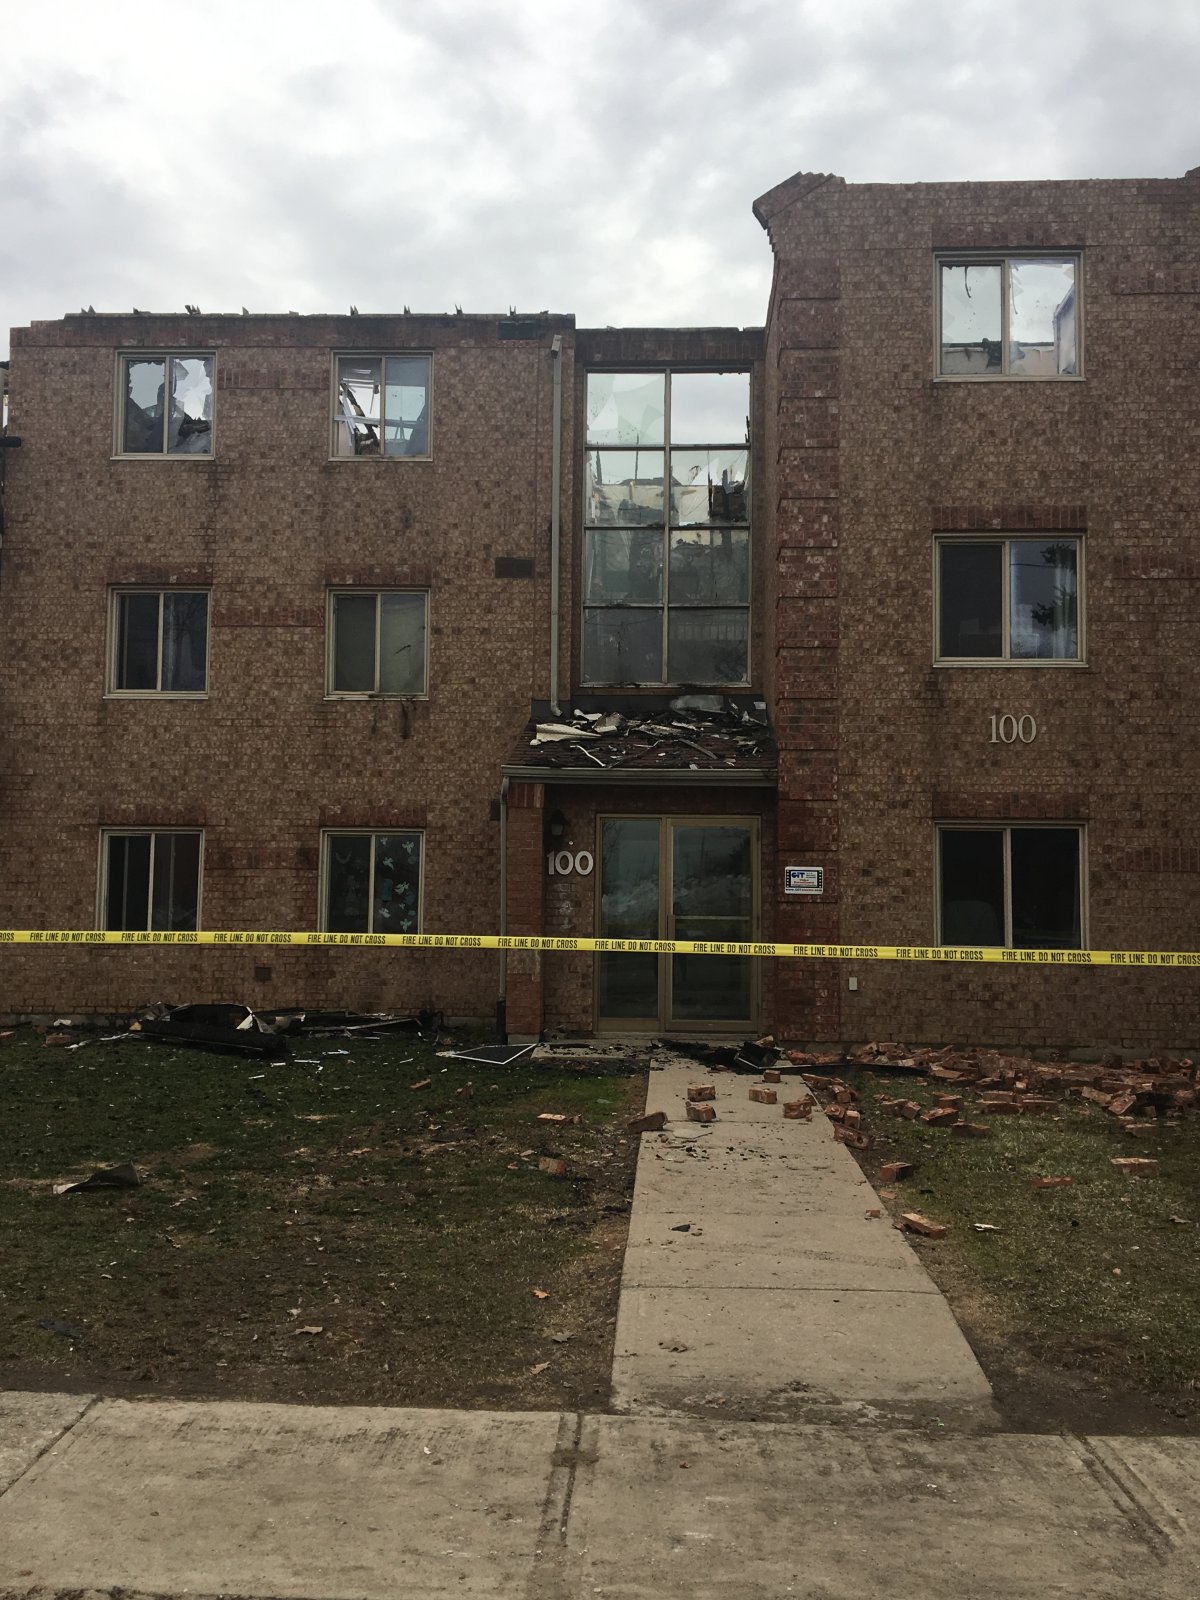 A devastating fire destroyed an apartment building in Barrie's Allandale neighbourhood in April, displacing dozens of residents.